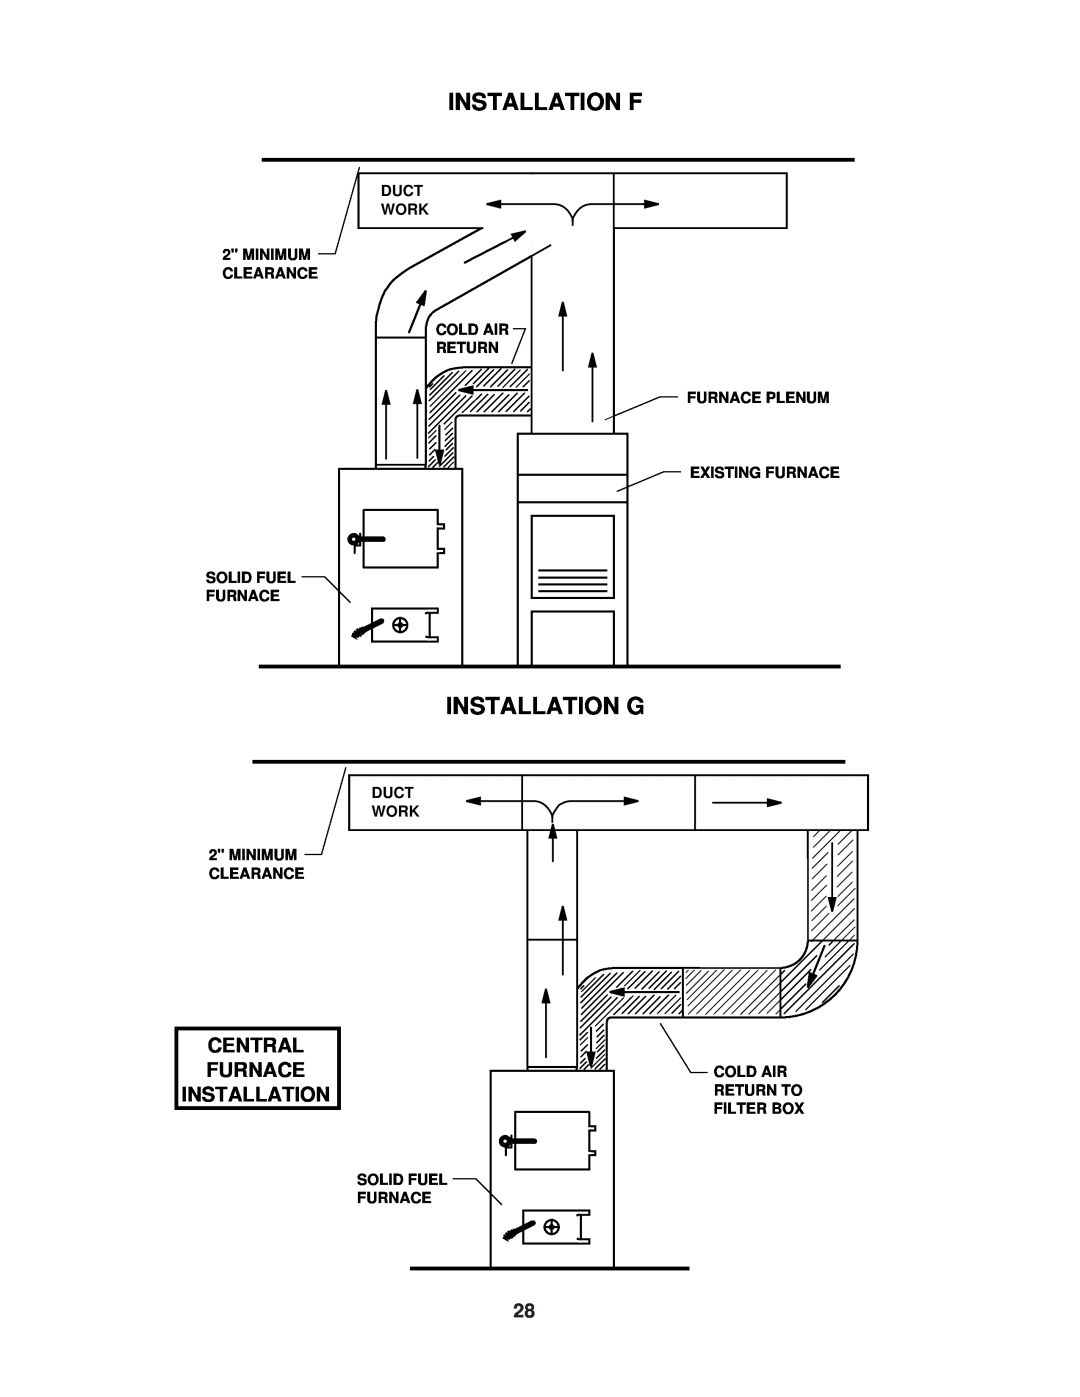 United States Stove 1537Q owner manual Installation F, Installation G, Central Furnace Installation 